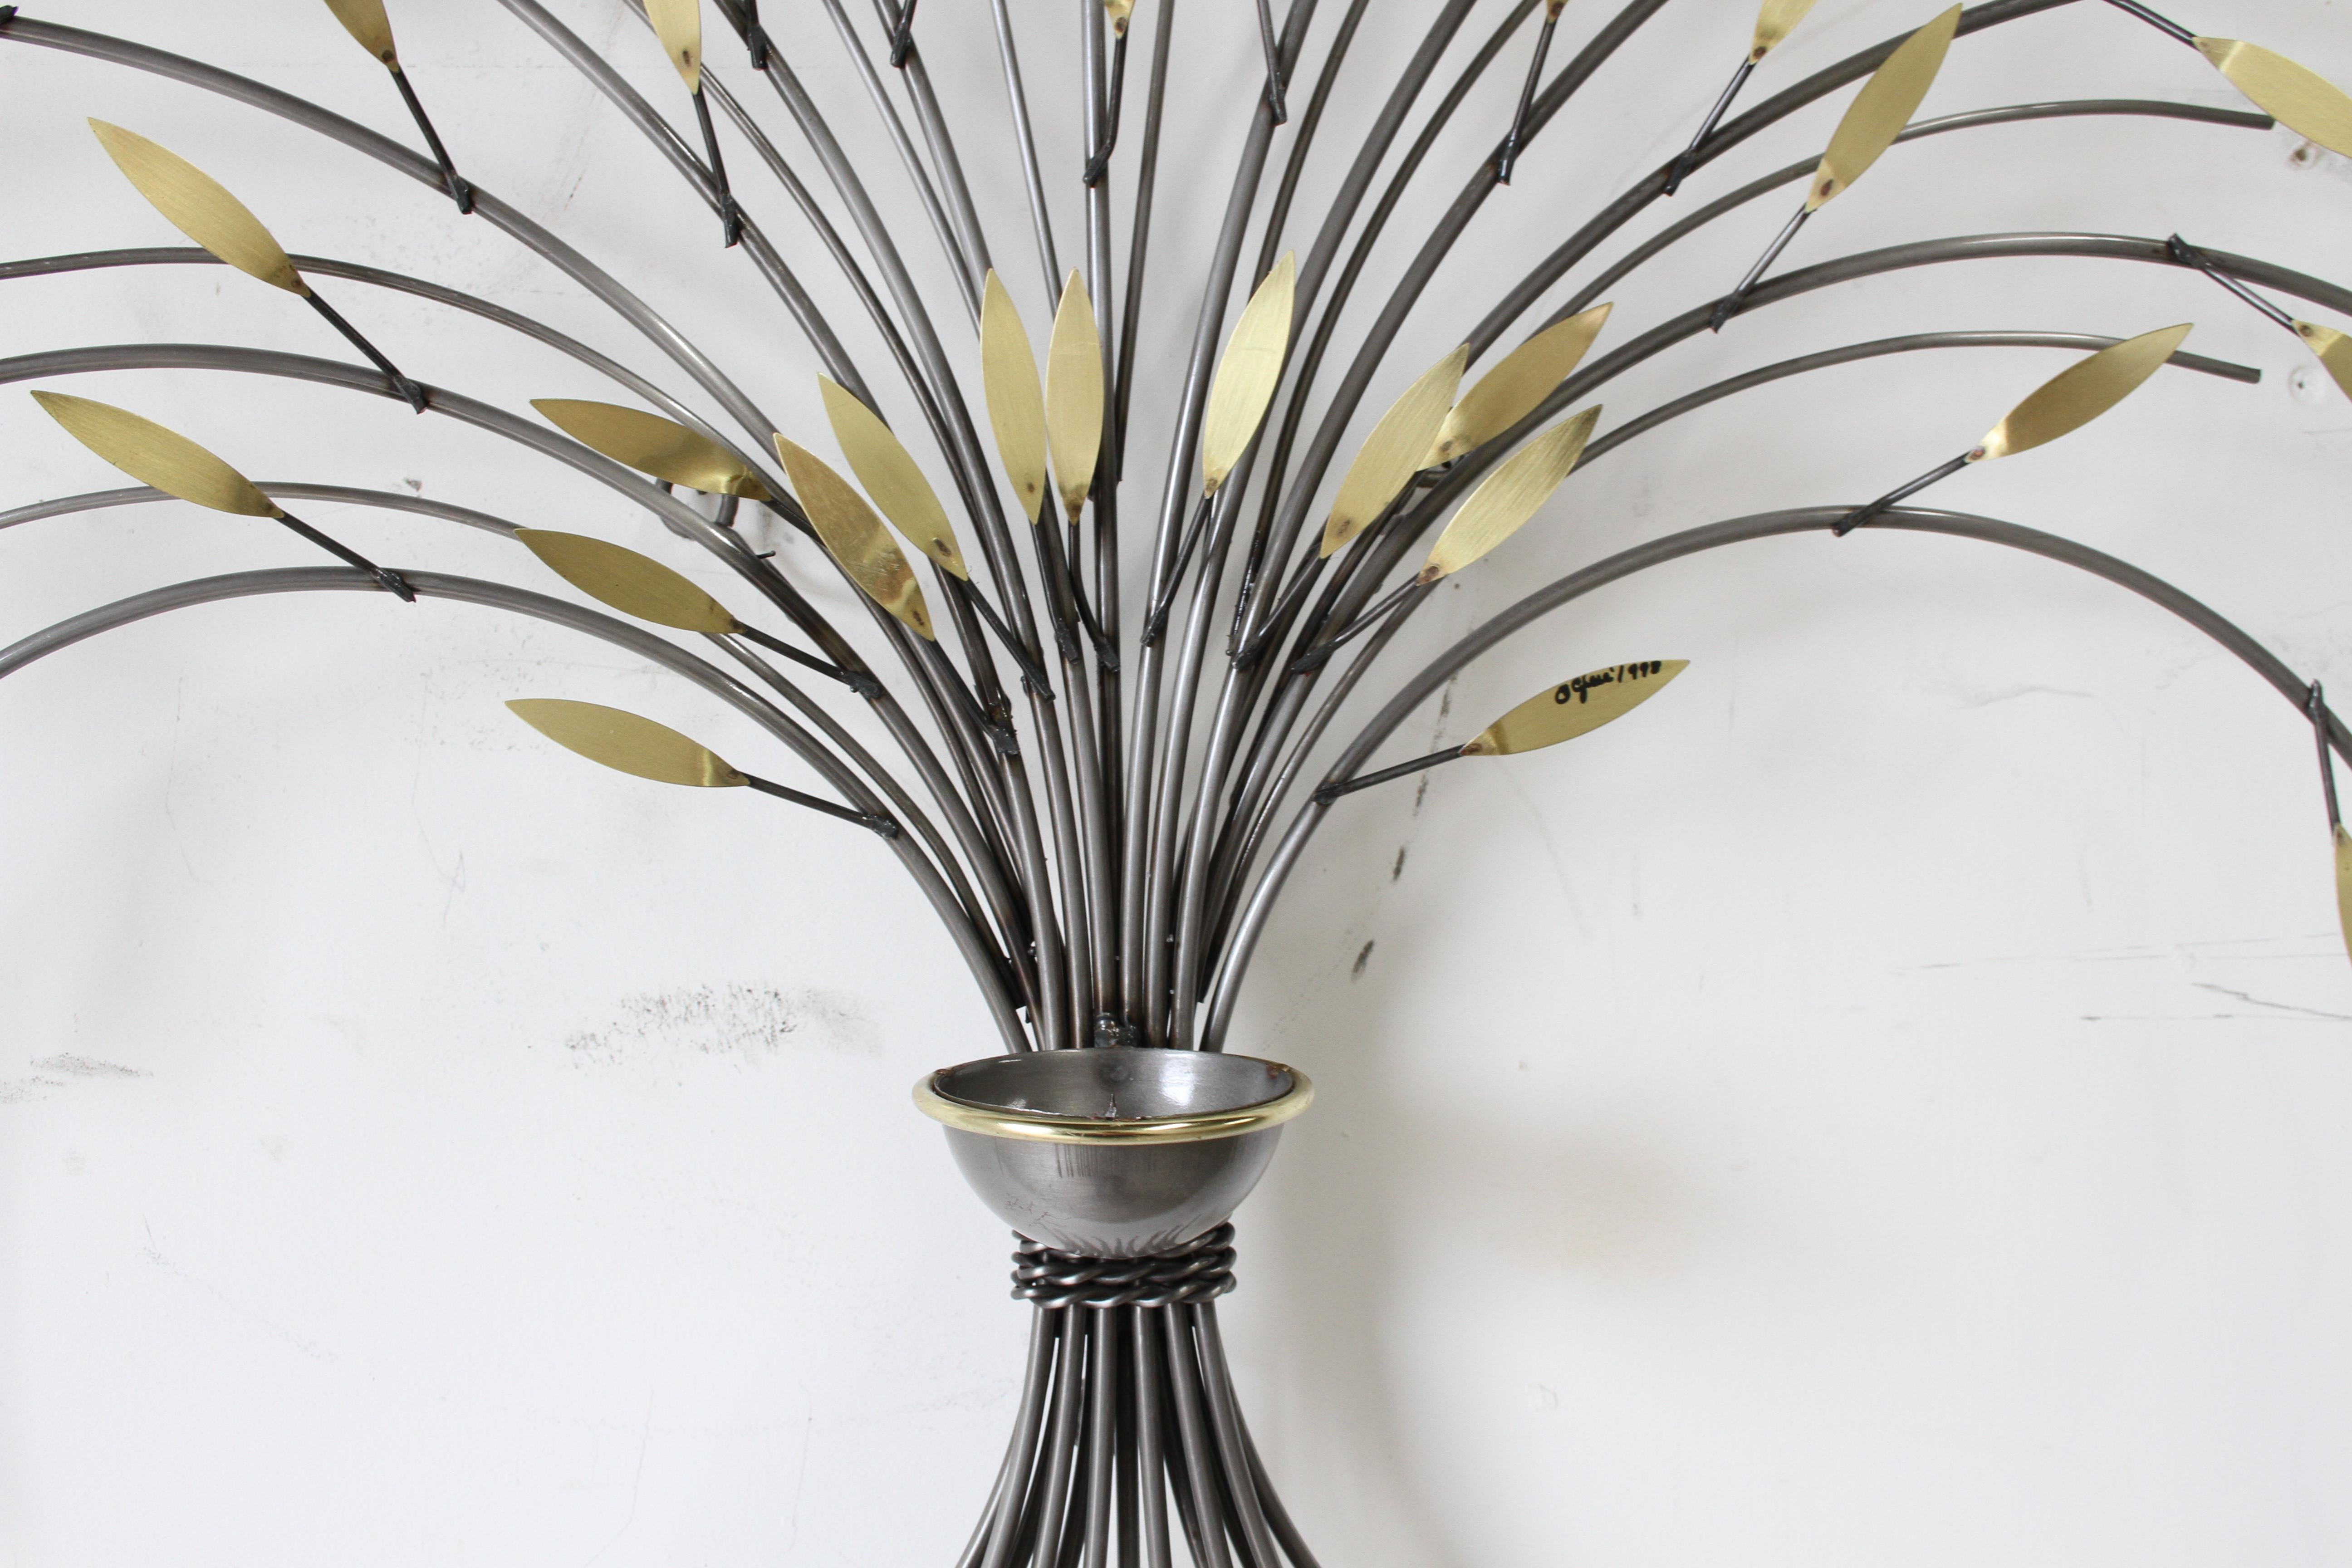 Curtis Jeré, Tree Sculpture Candleholder or Sconce Made of Brass and Steel In Good Condition For Sale In St. Louis, MO